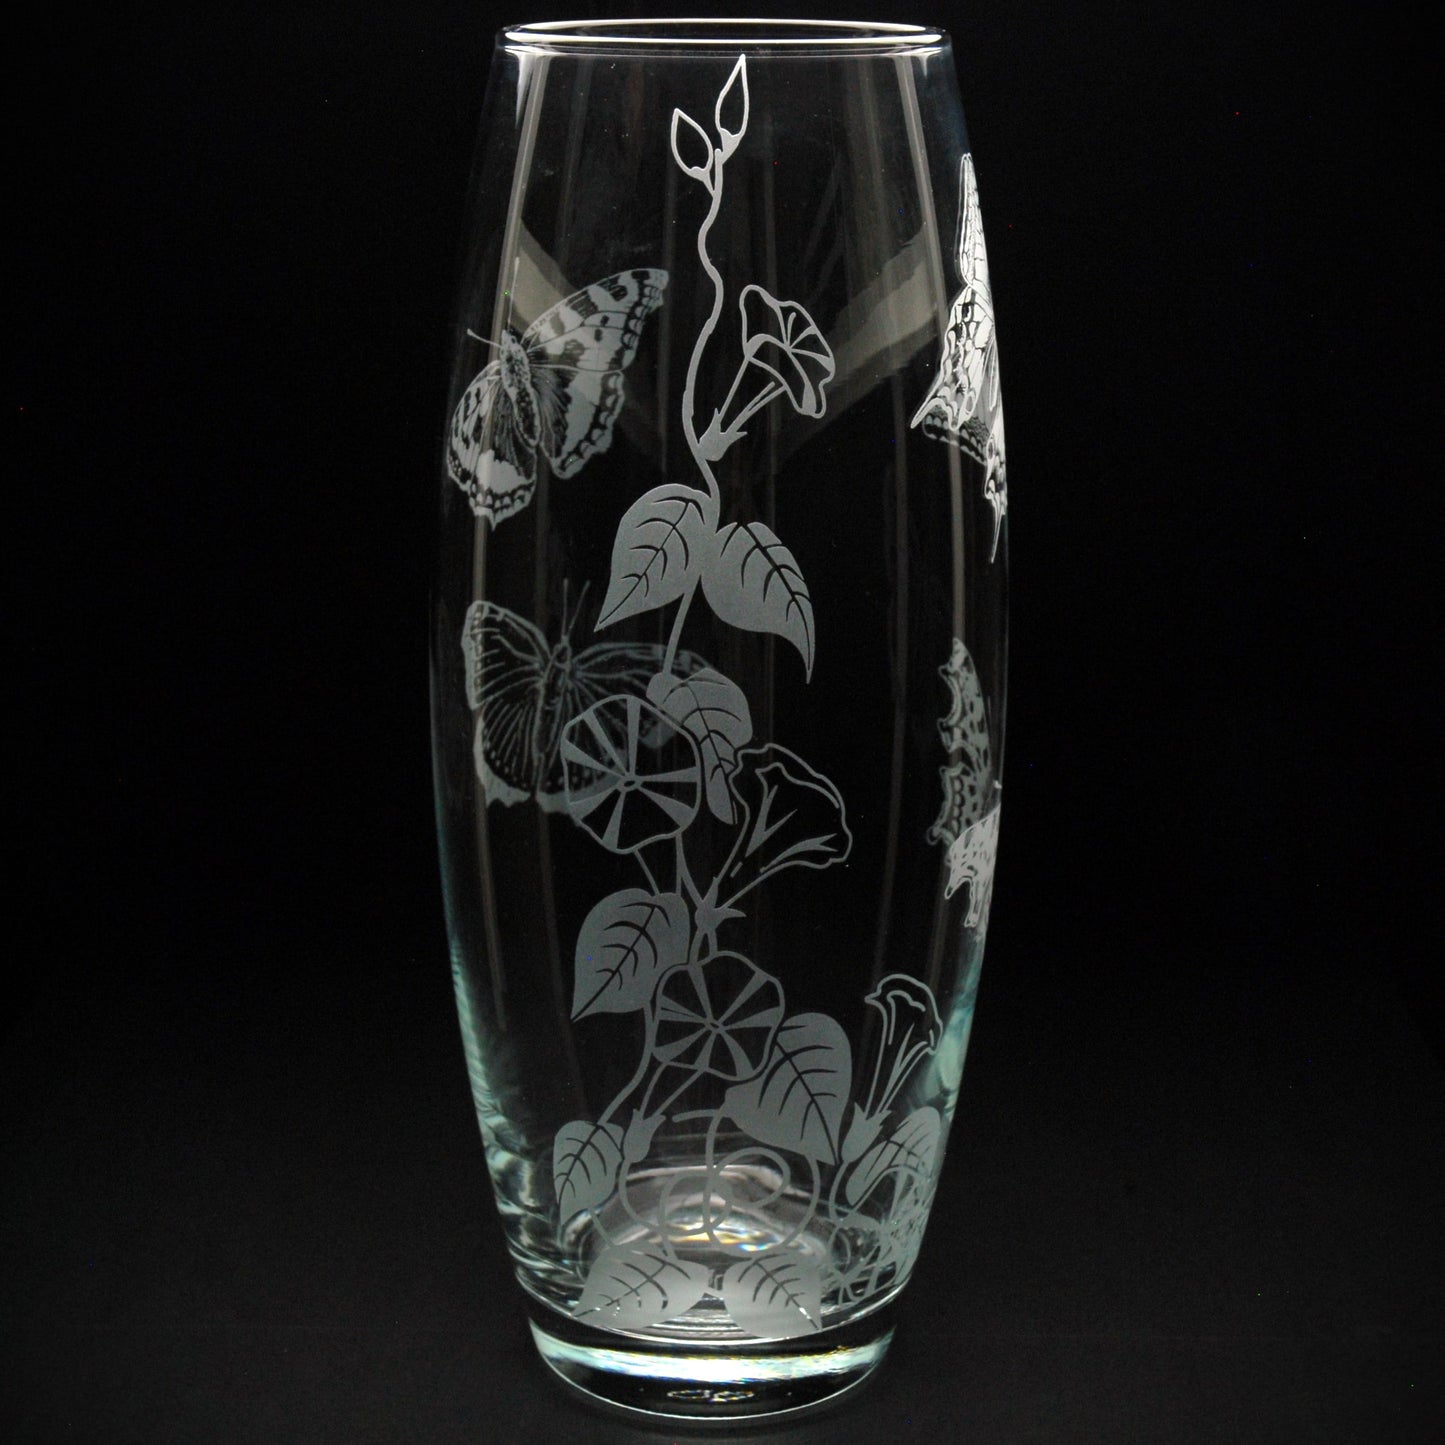 Convolvulus and Butterfly Glass Botanica Vase - 26cm - Hand Etched/Engraved Gift